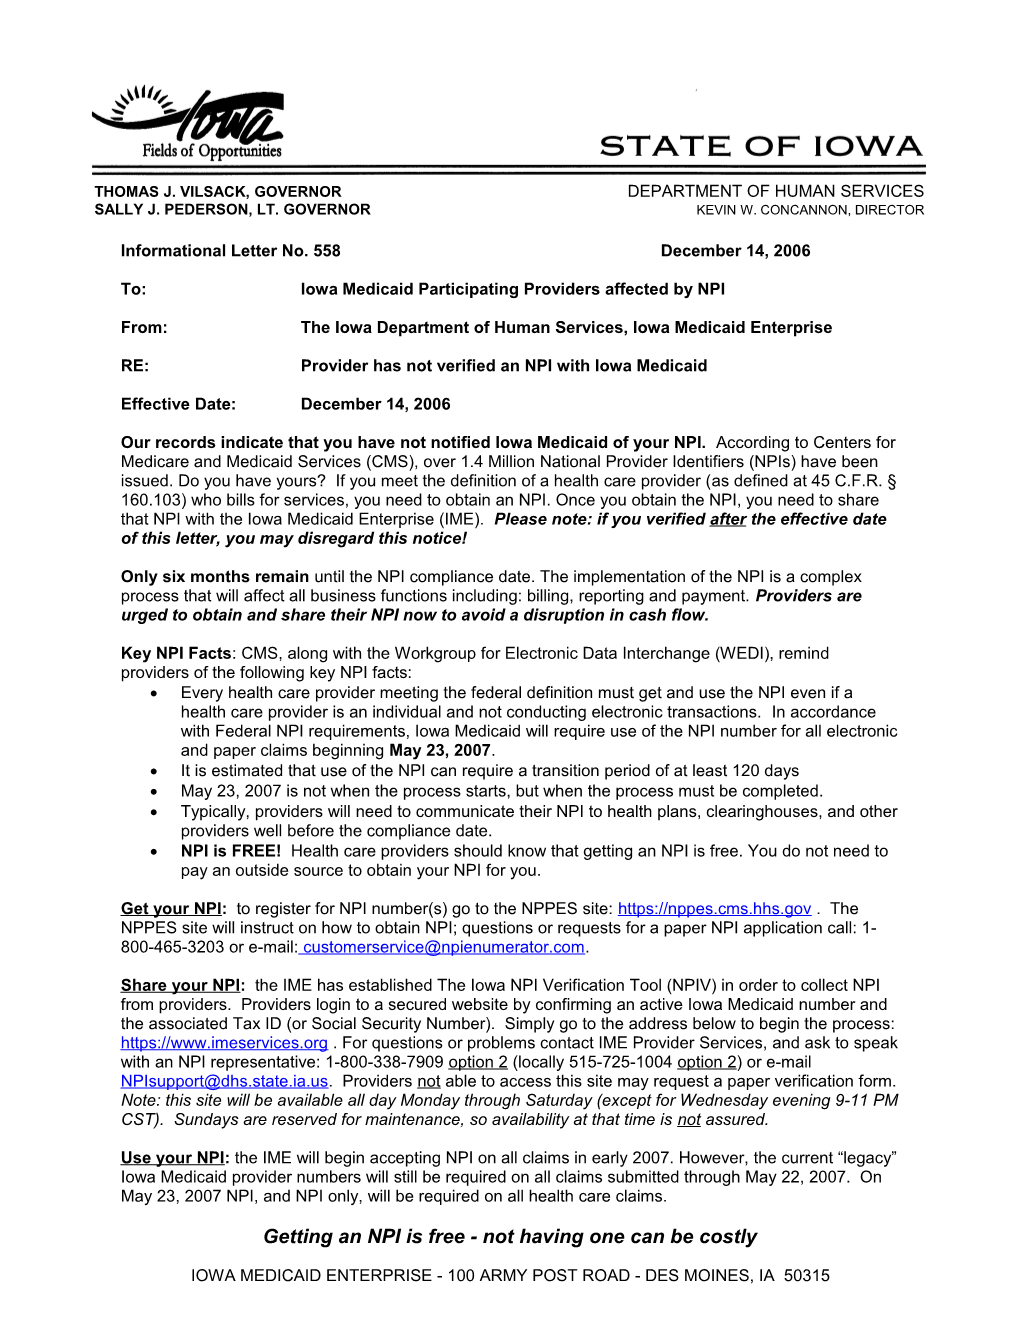 Department of Human Services Letterhead s13